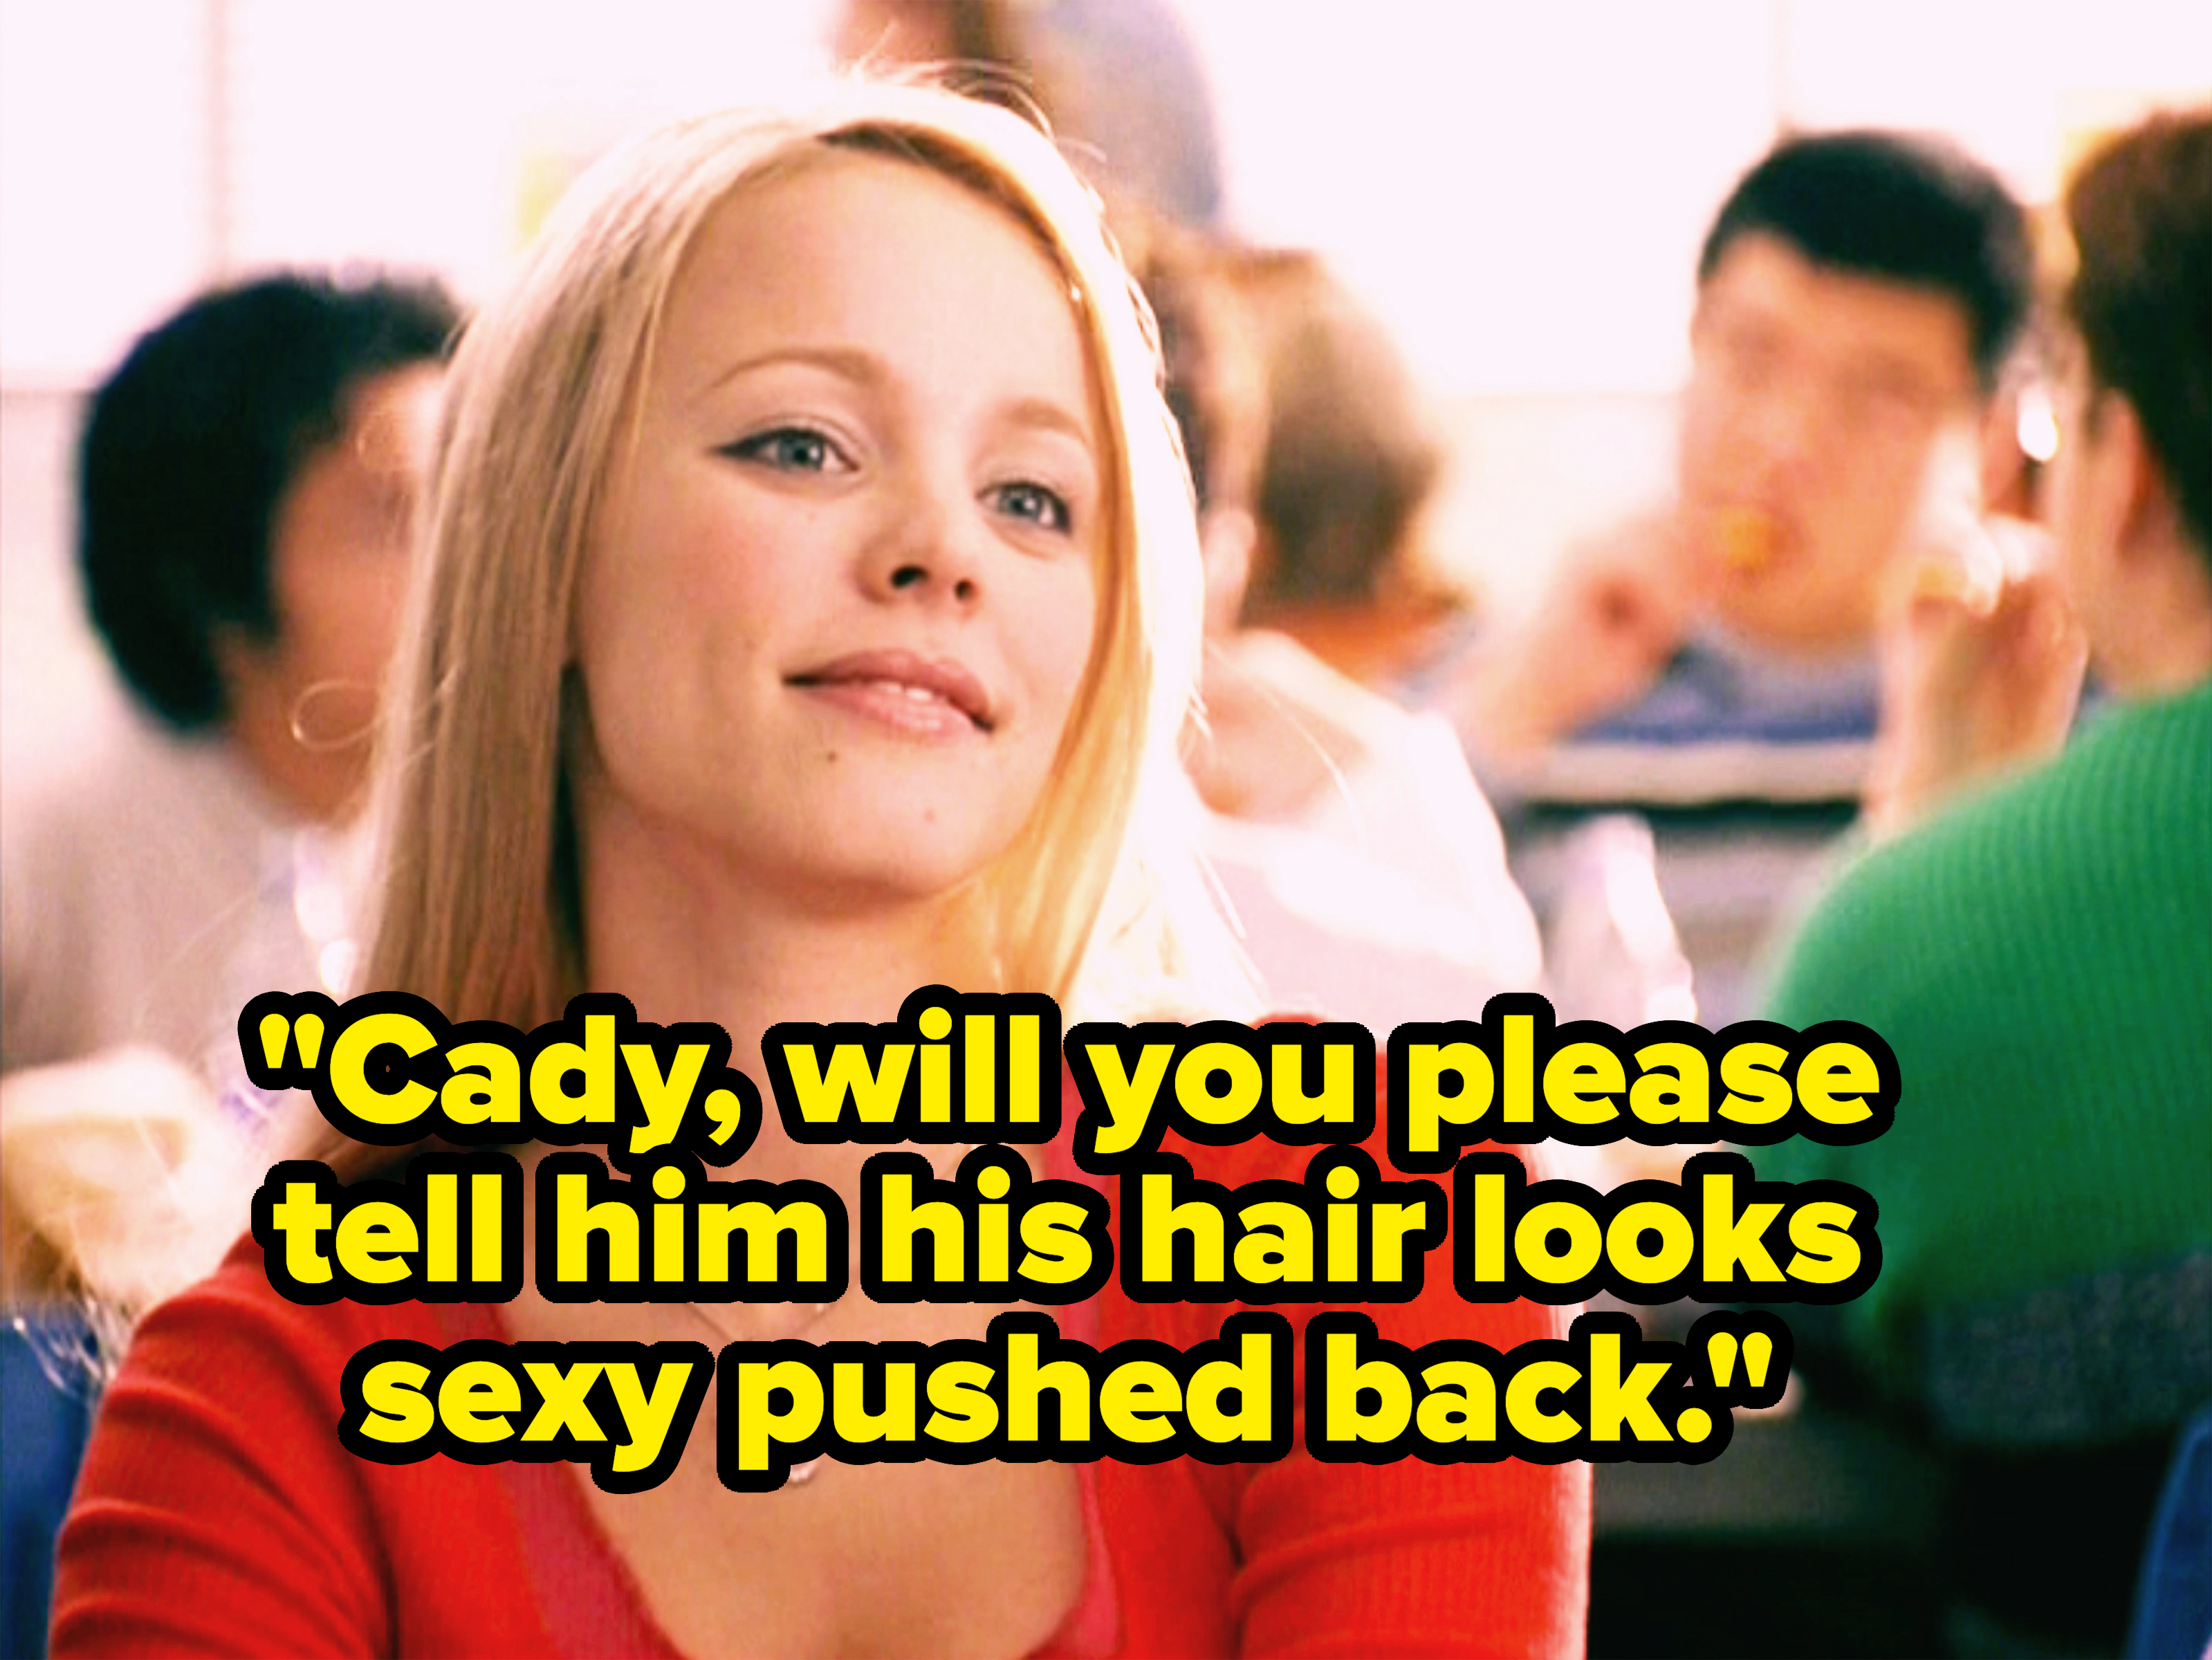 Regina George wears a huge R necklace and looks up. Text reads &quot;Cady, will you please tell him his hair looks sexy pushed back?&quot;